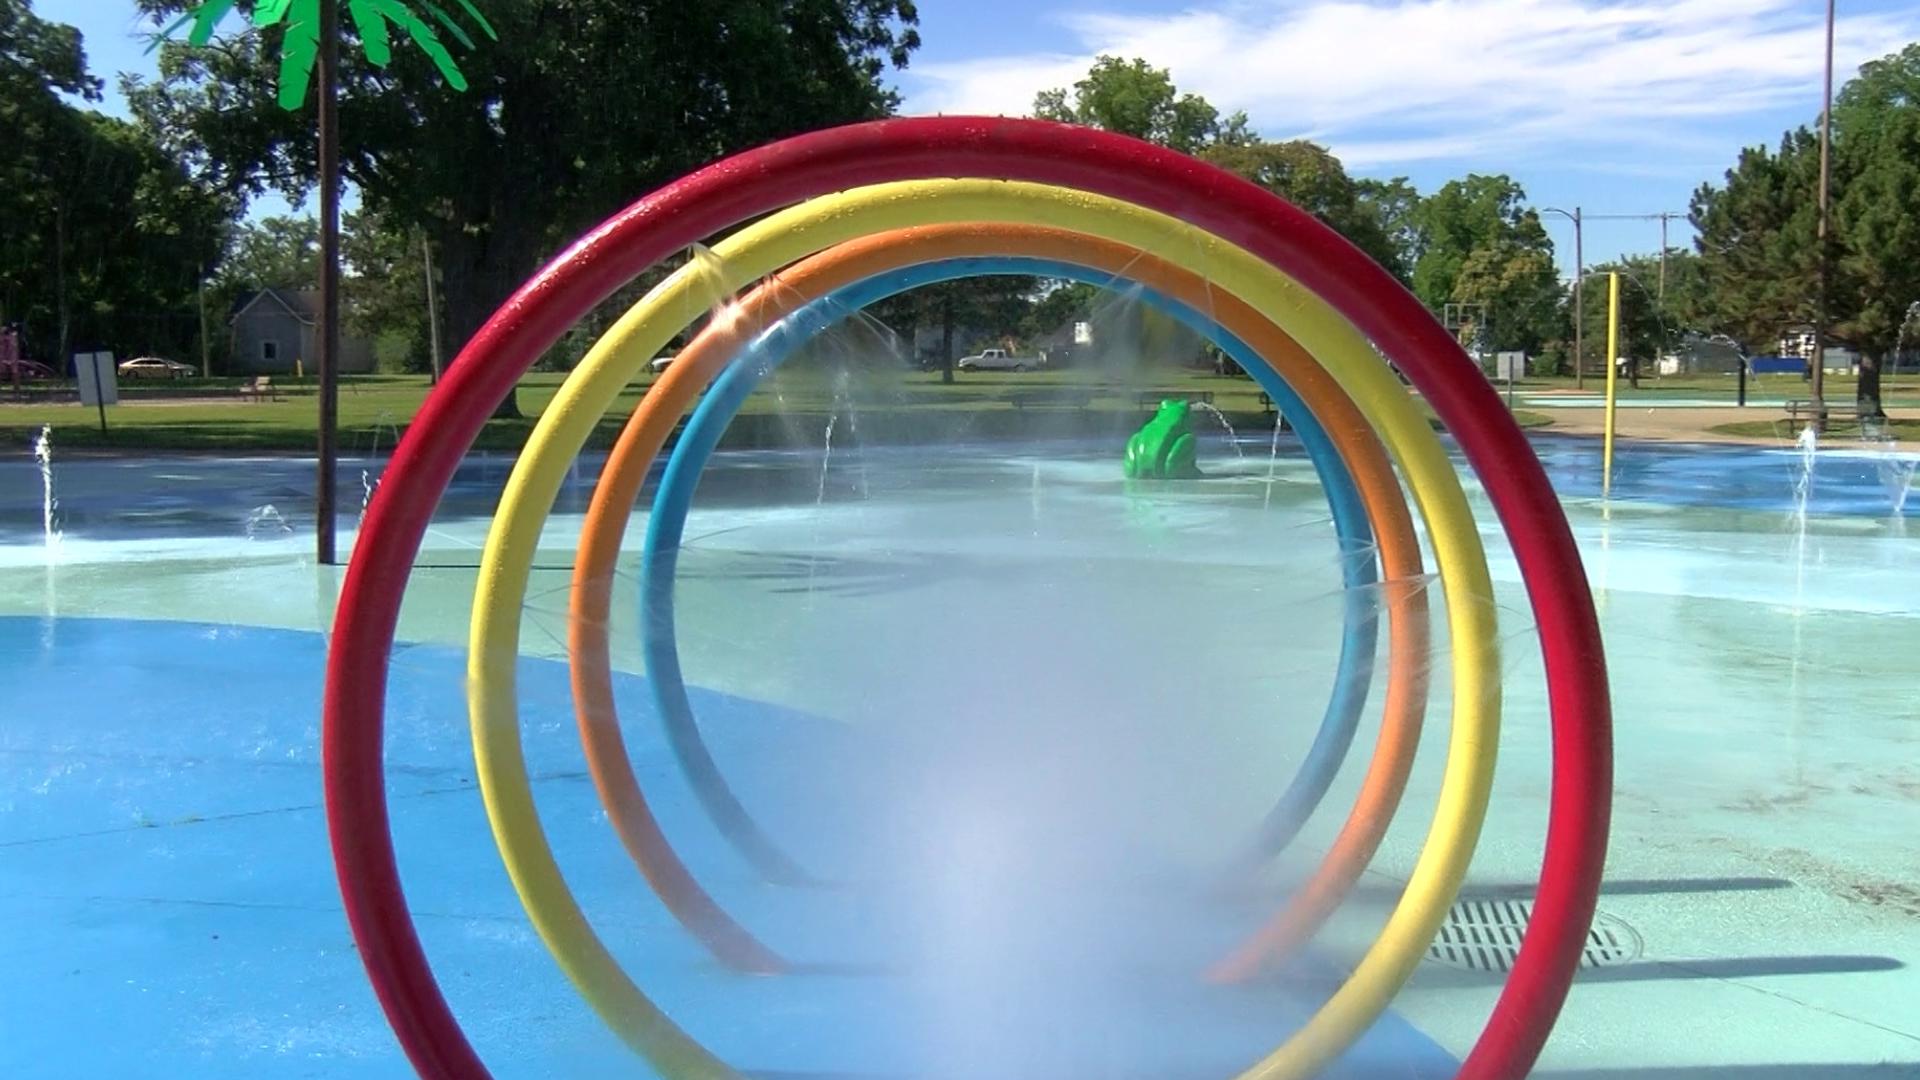 For the first time this year, the splash pad is open, safe and in compliance with state laws, according to officials.